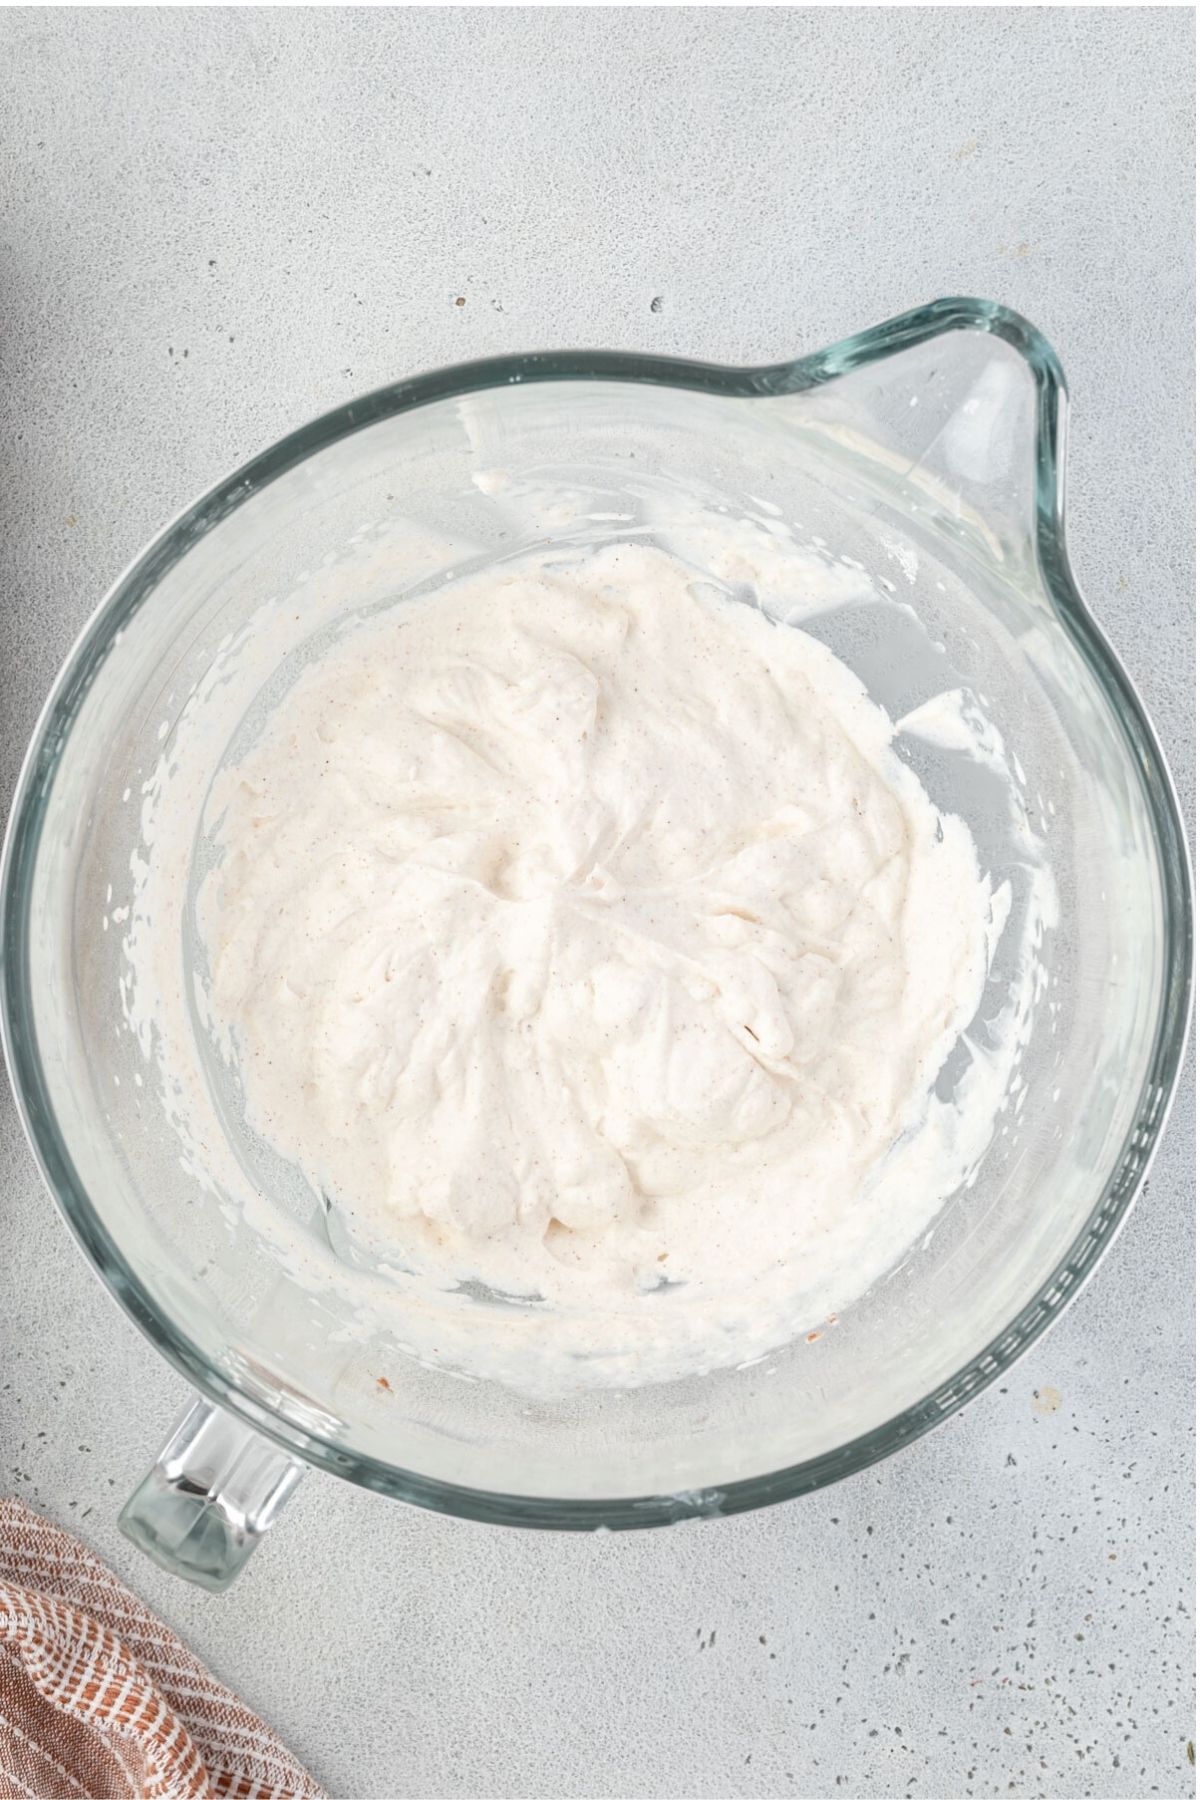 Large mixing bowl with fluffy whipped cream.